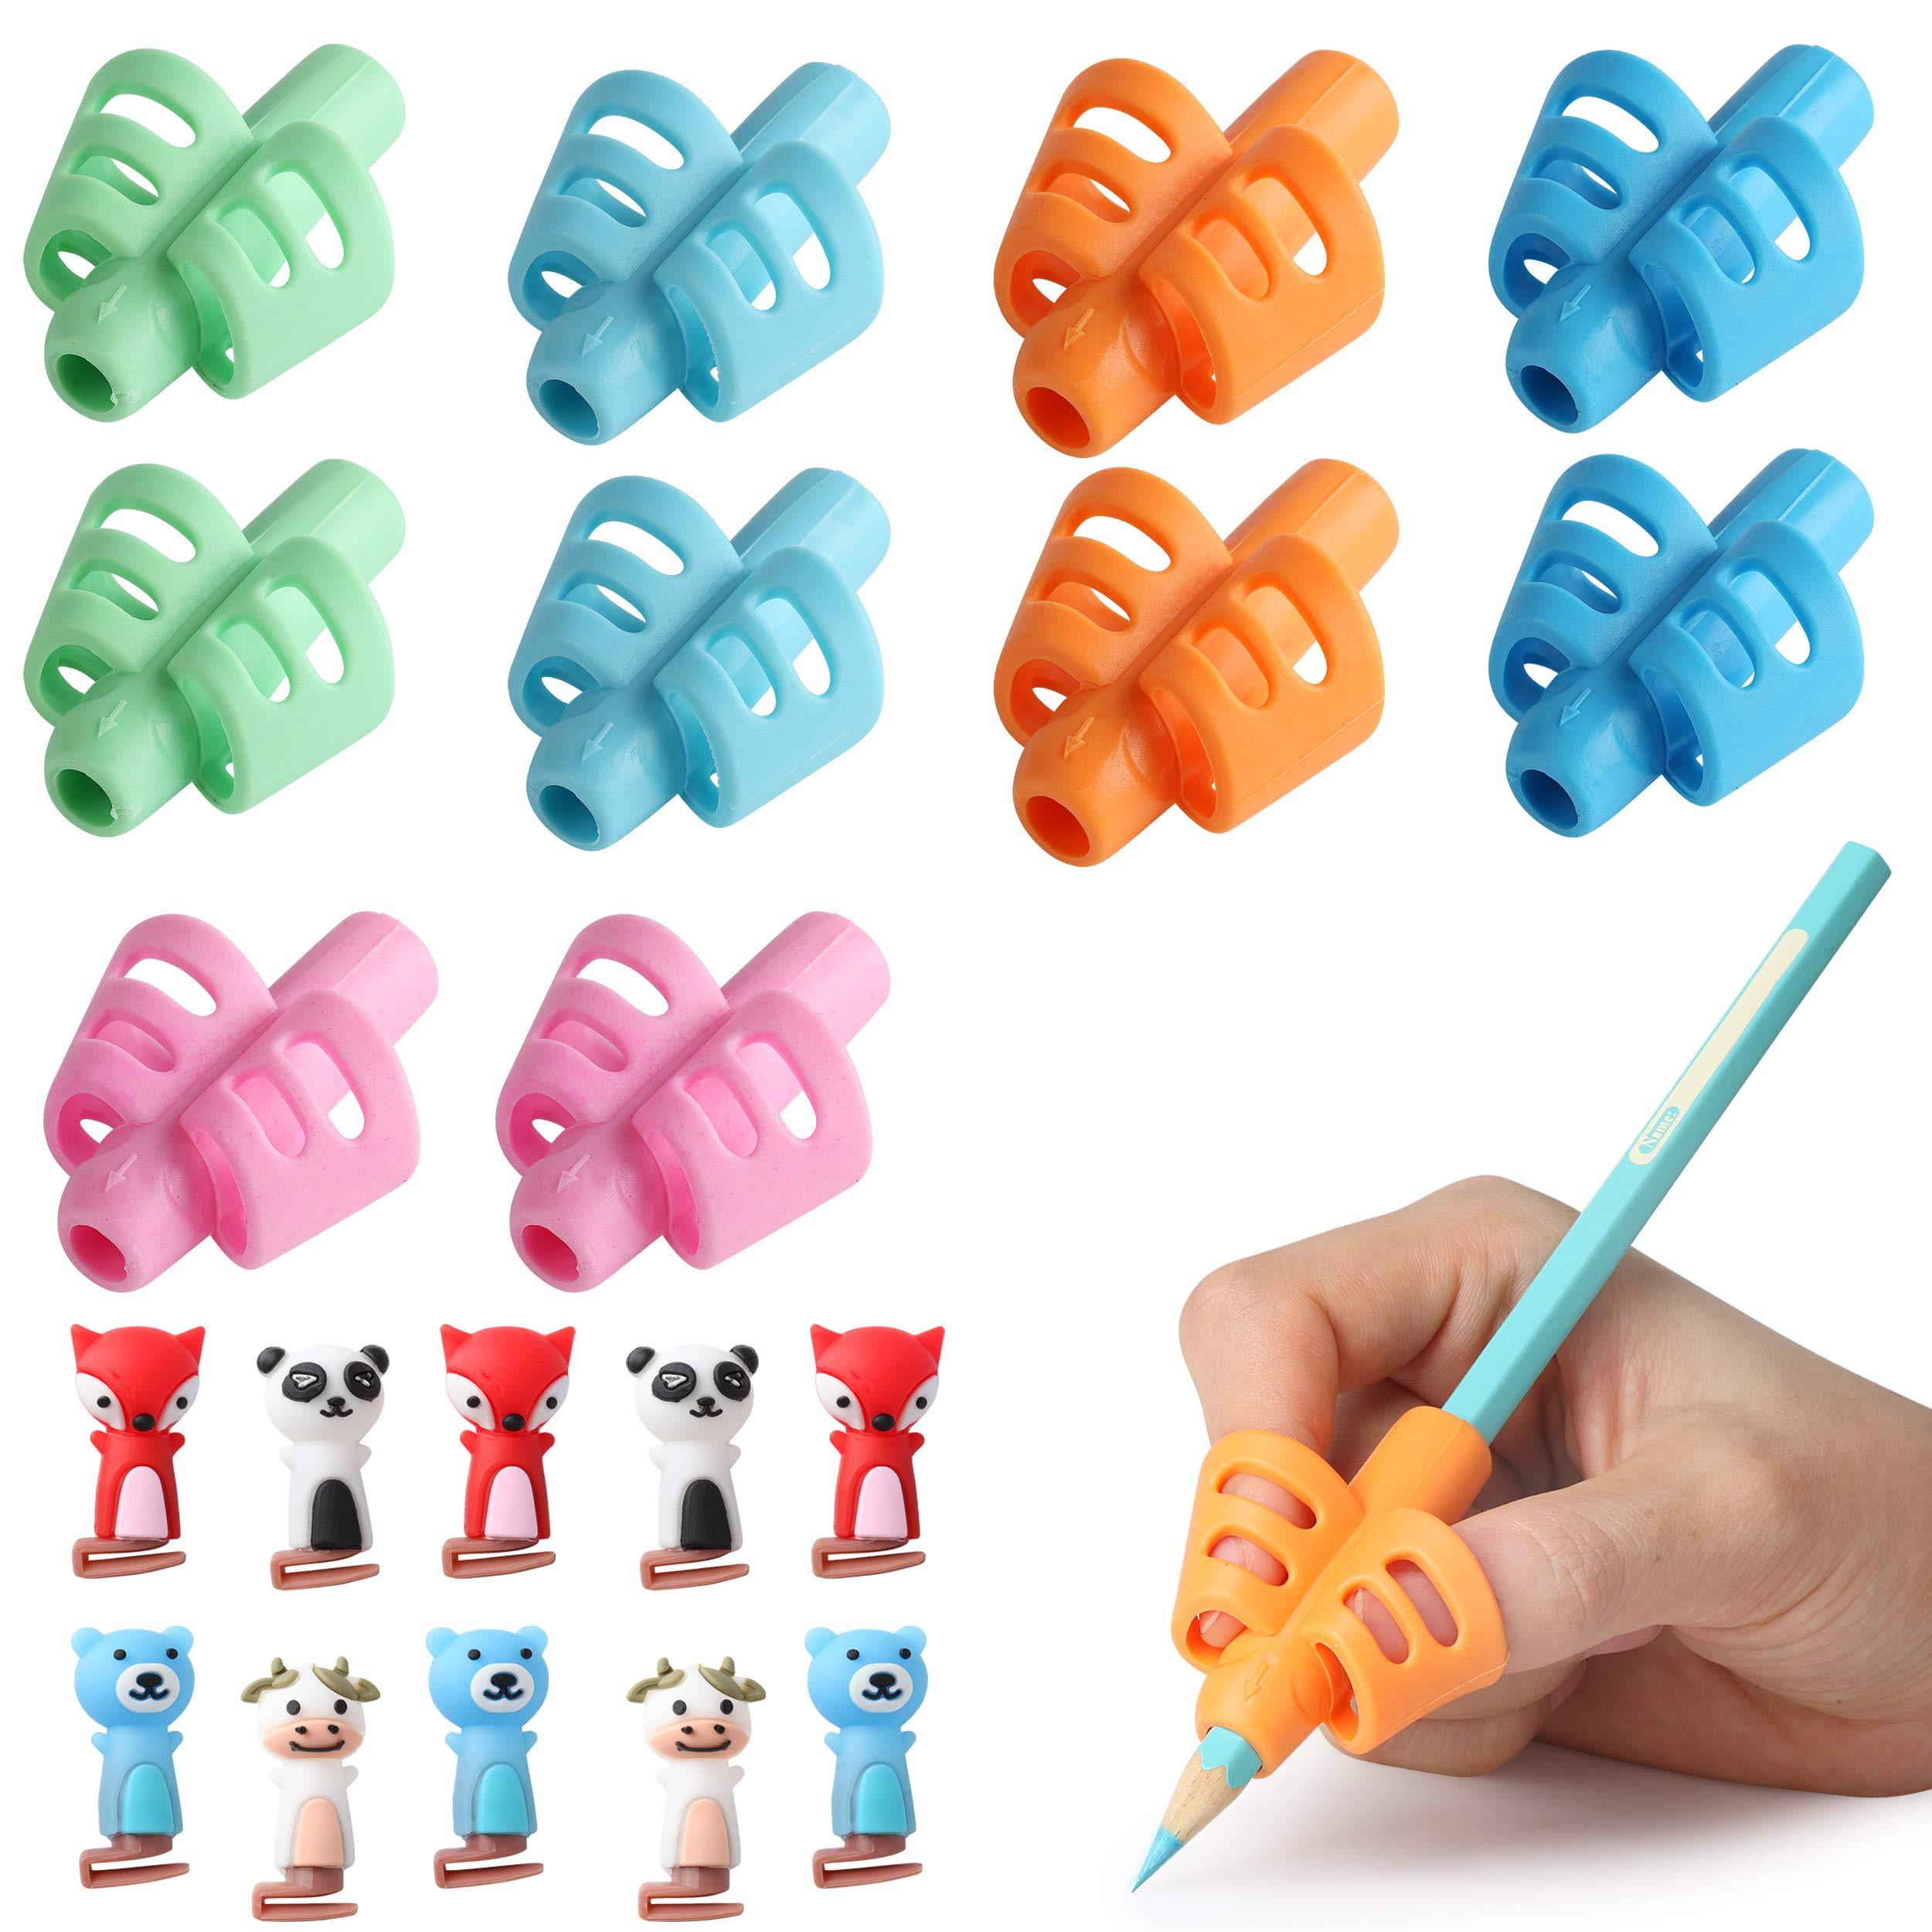 Pencil Grips For Kids Handwriting Aid Grip Trainer Posture Correction 10 Pieces 